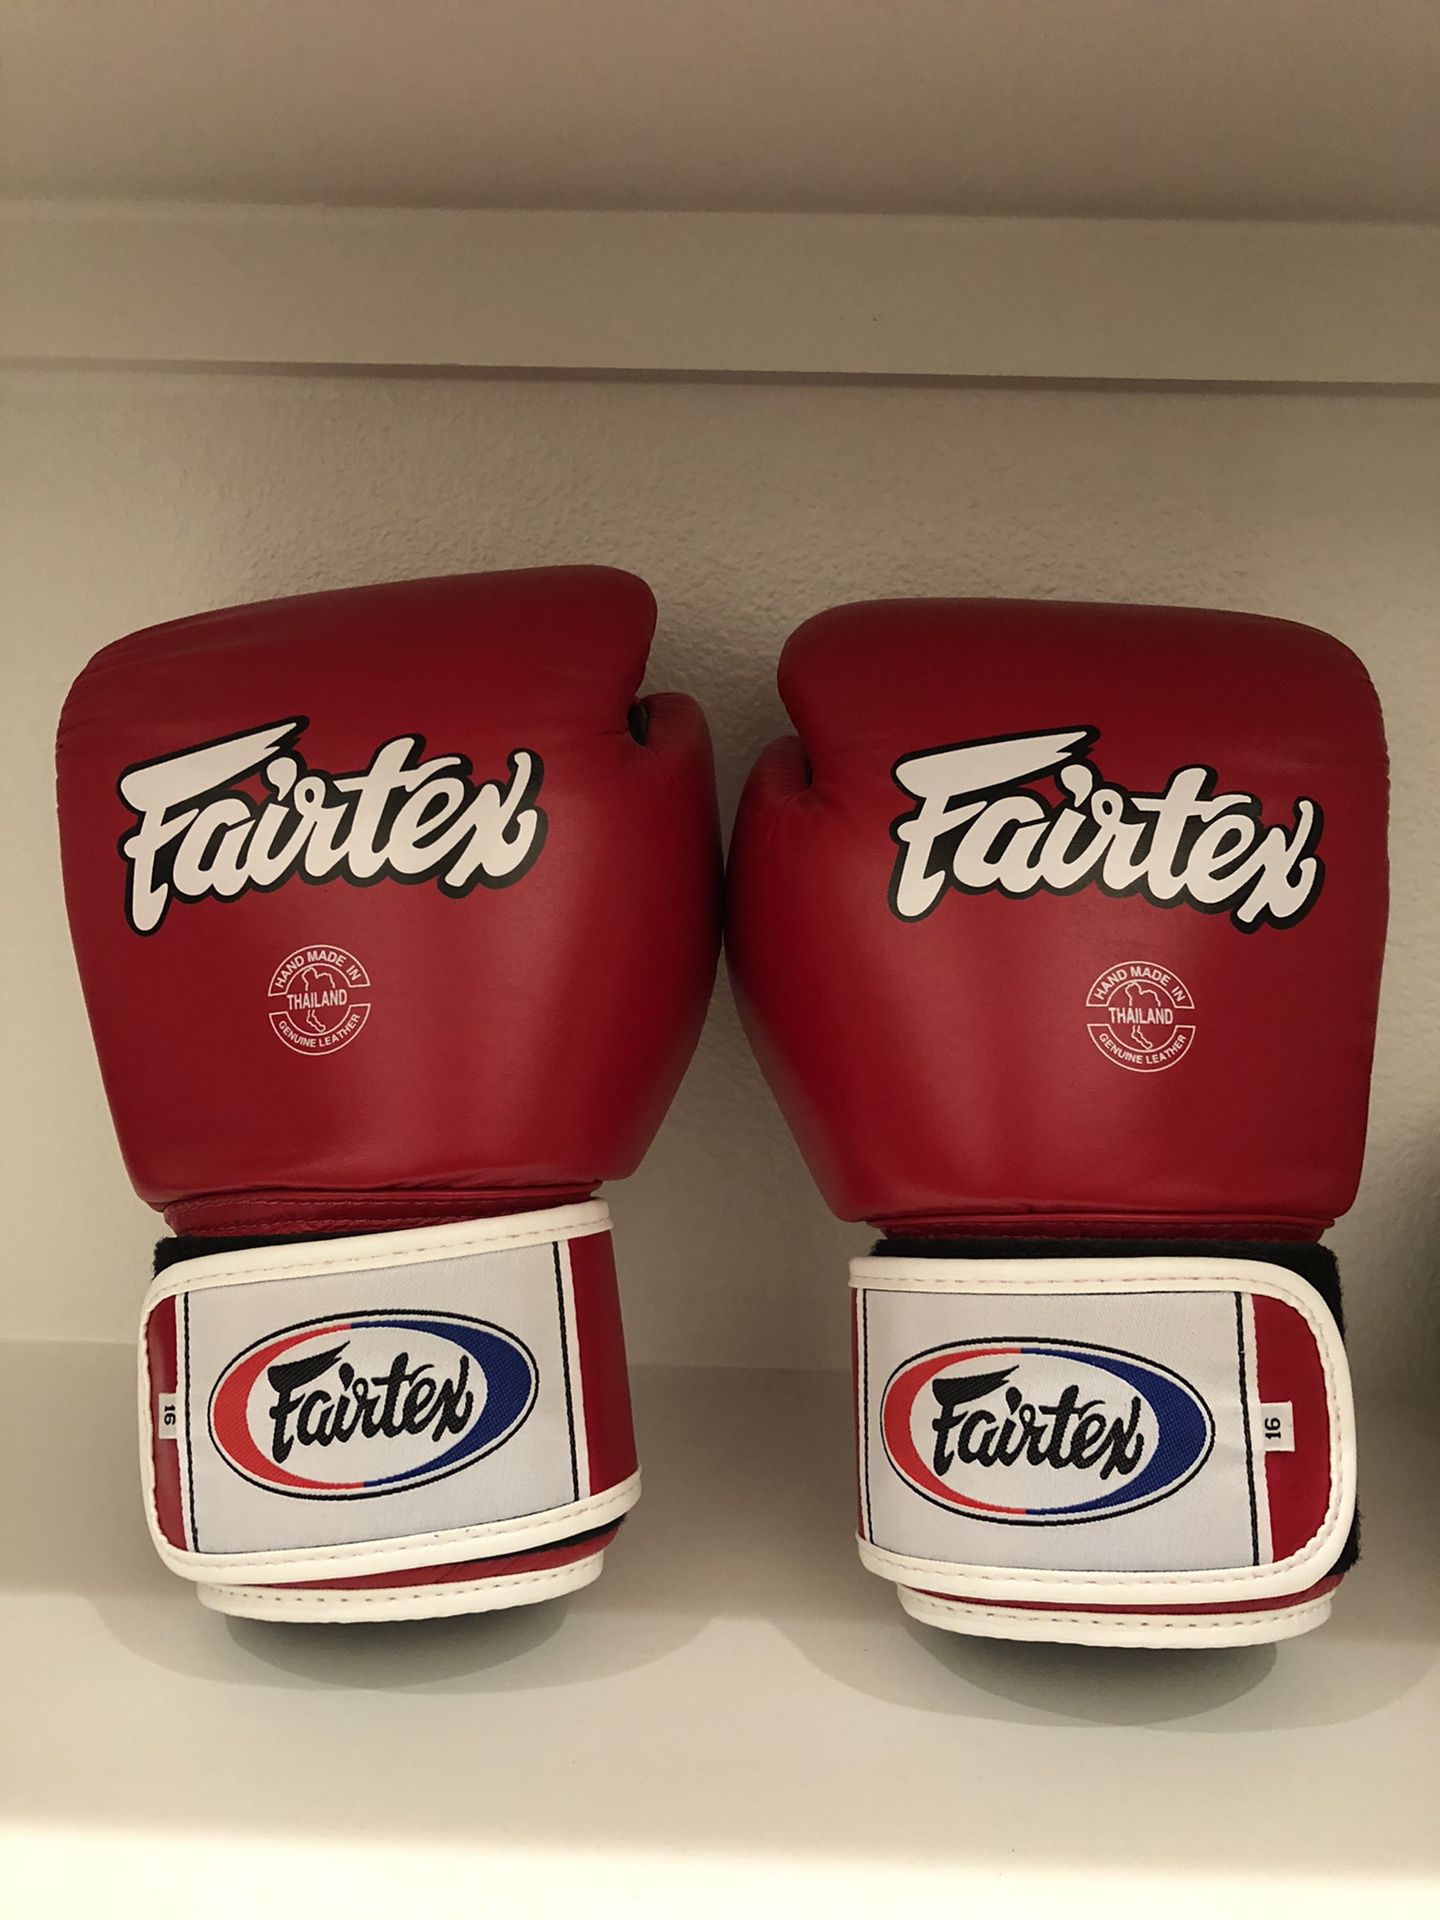 New & Clean (Worn once) Fairtex Boxing Gloves